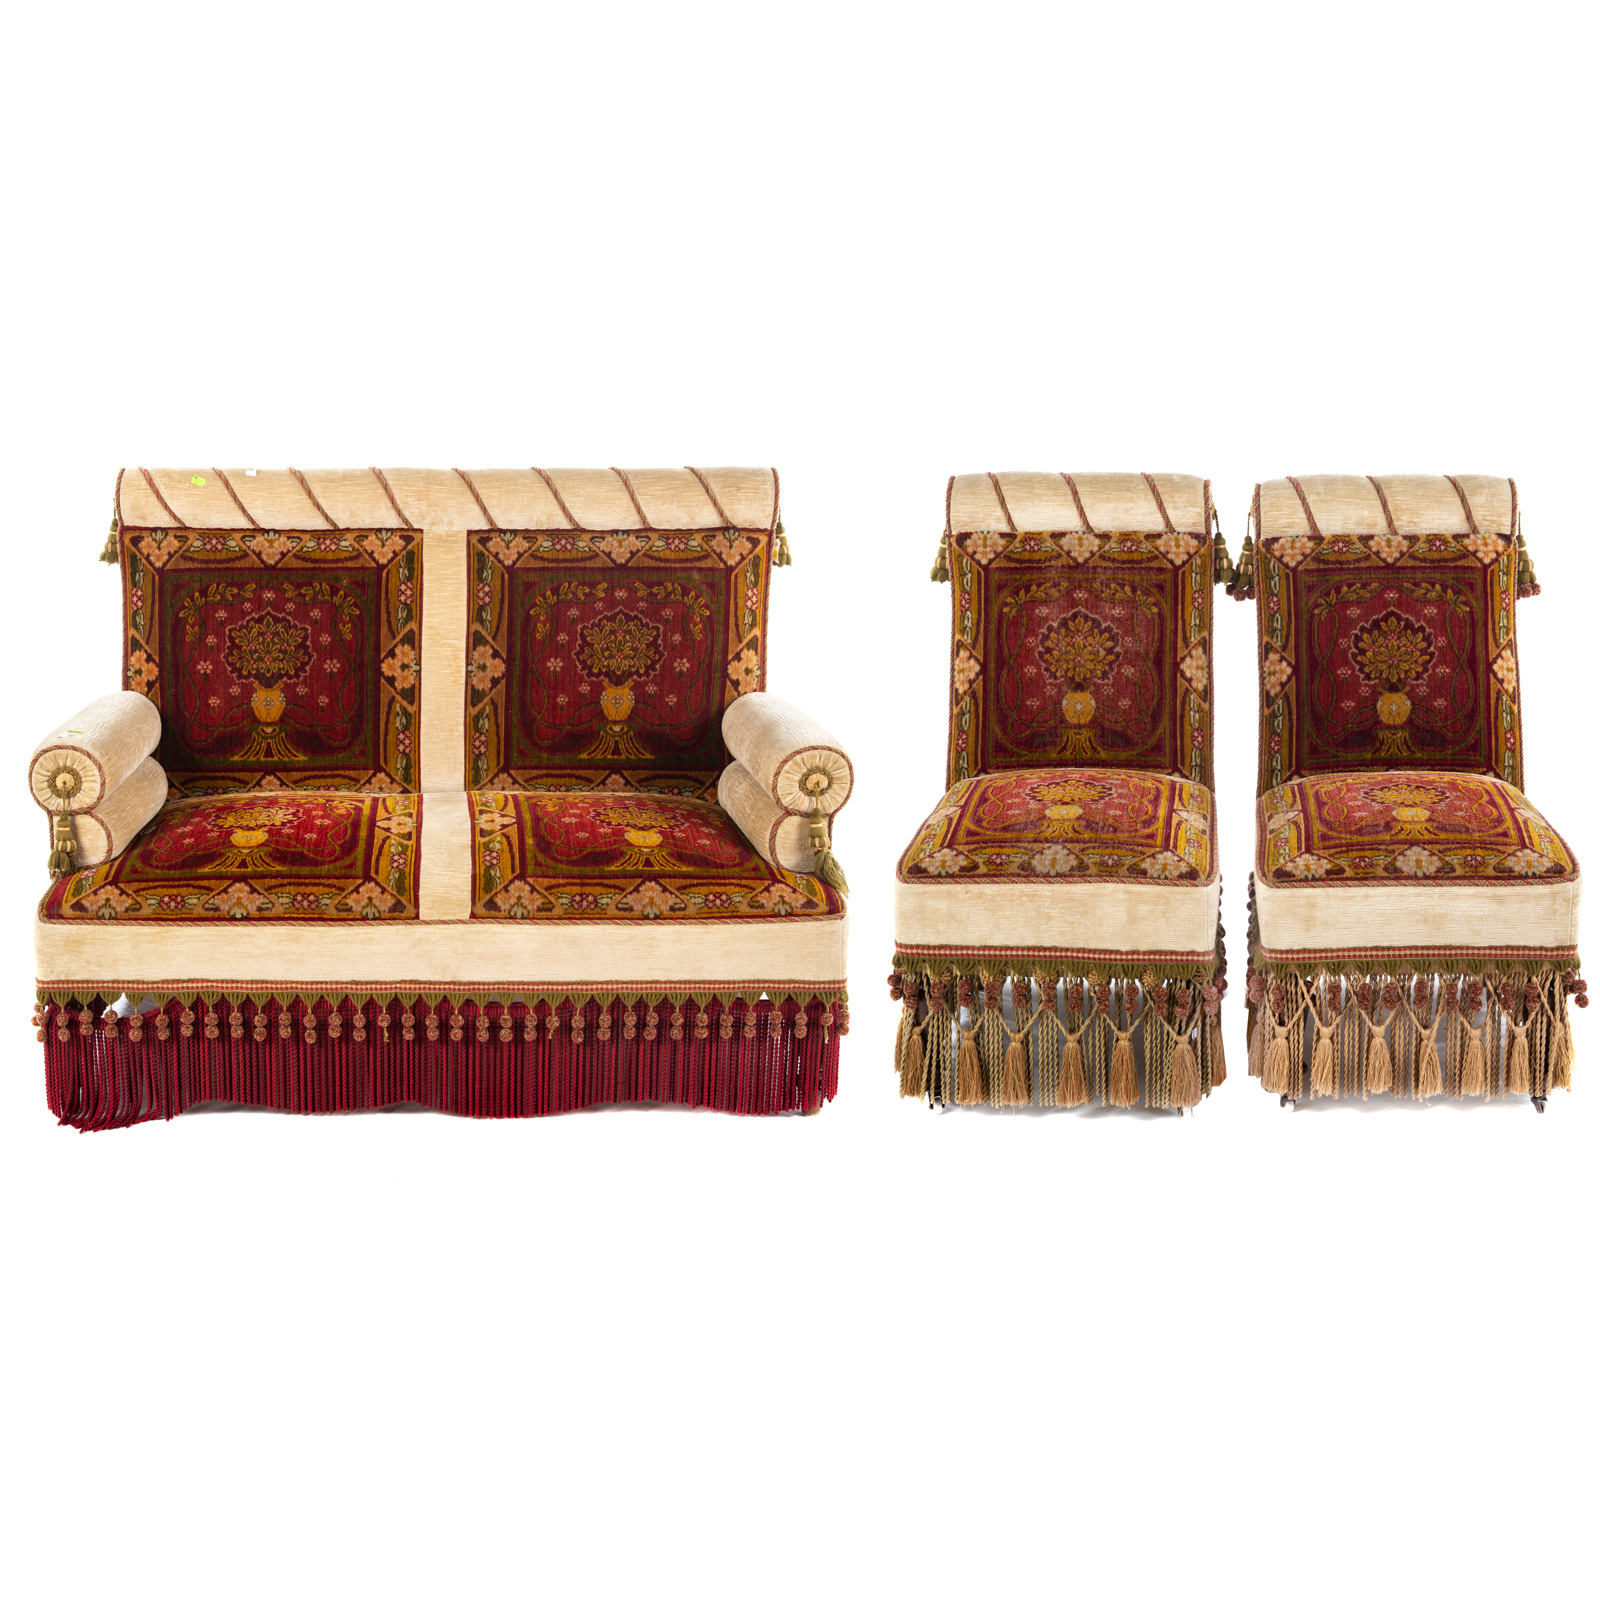 VICTORIAN STYLE UPHOLSTERED PARLOR 2e9931